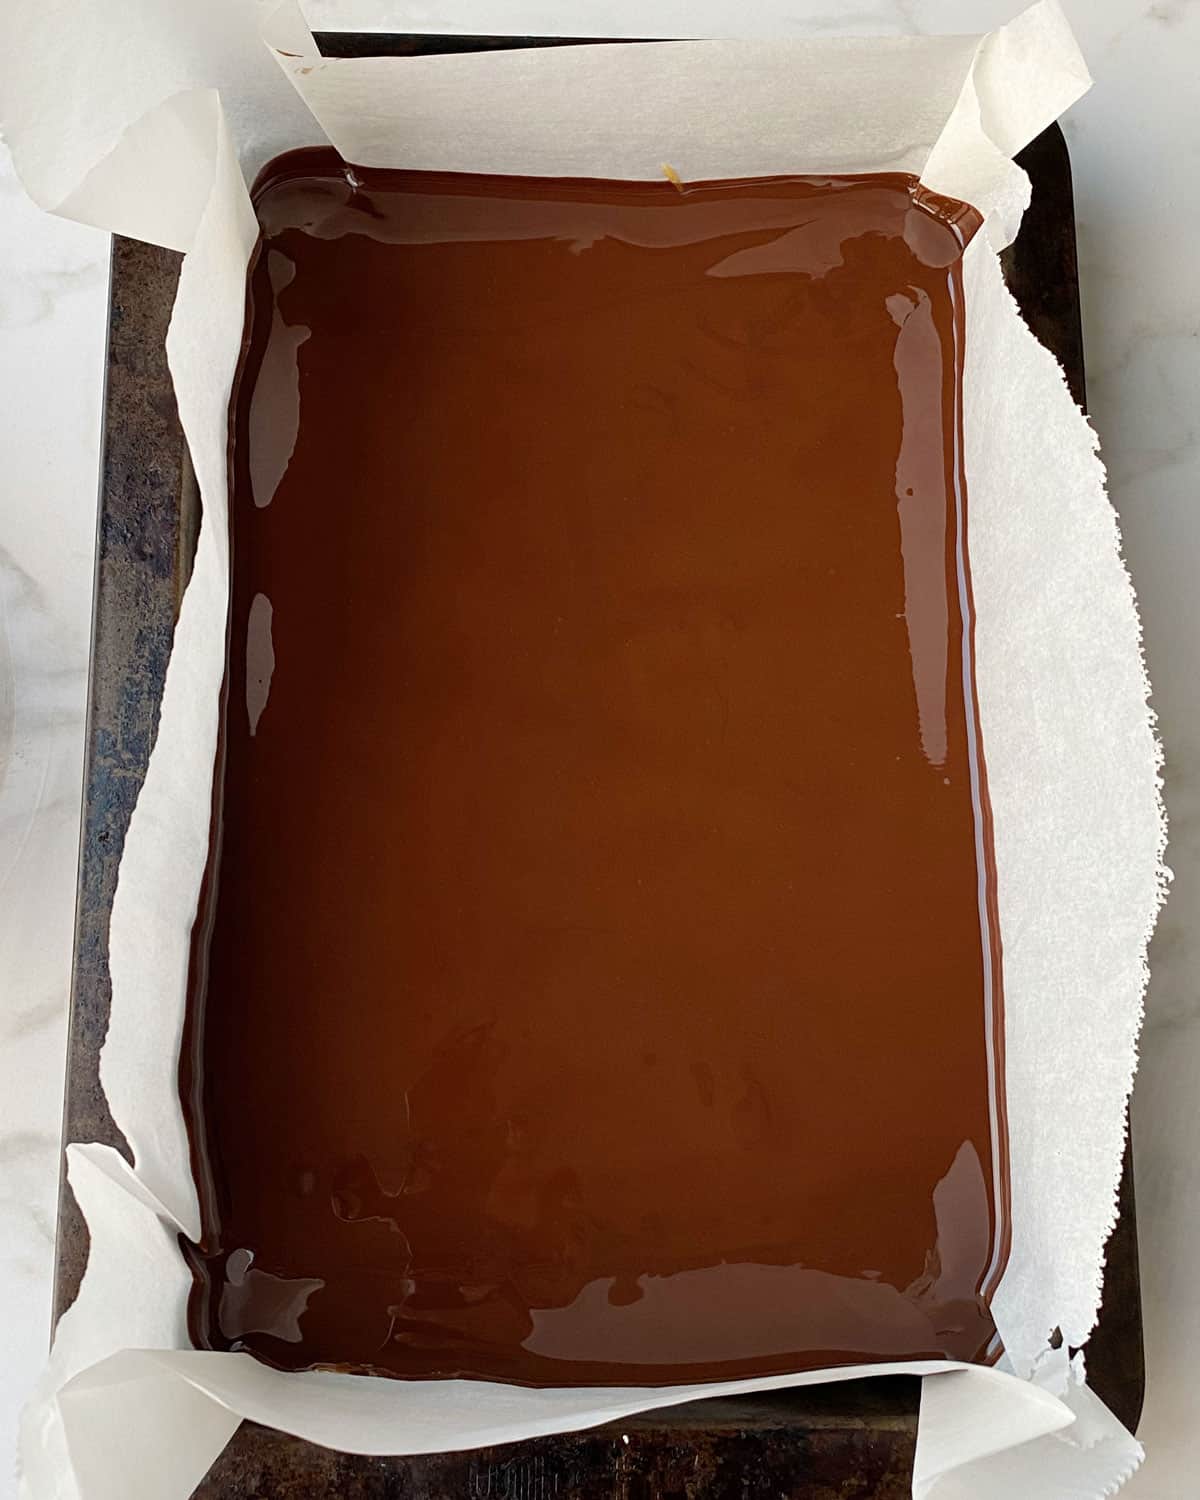 A lined baking filled with a slice covered in chocolate.